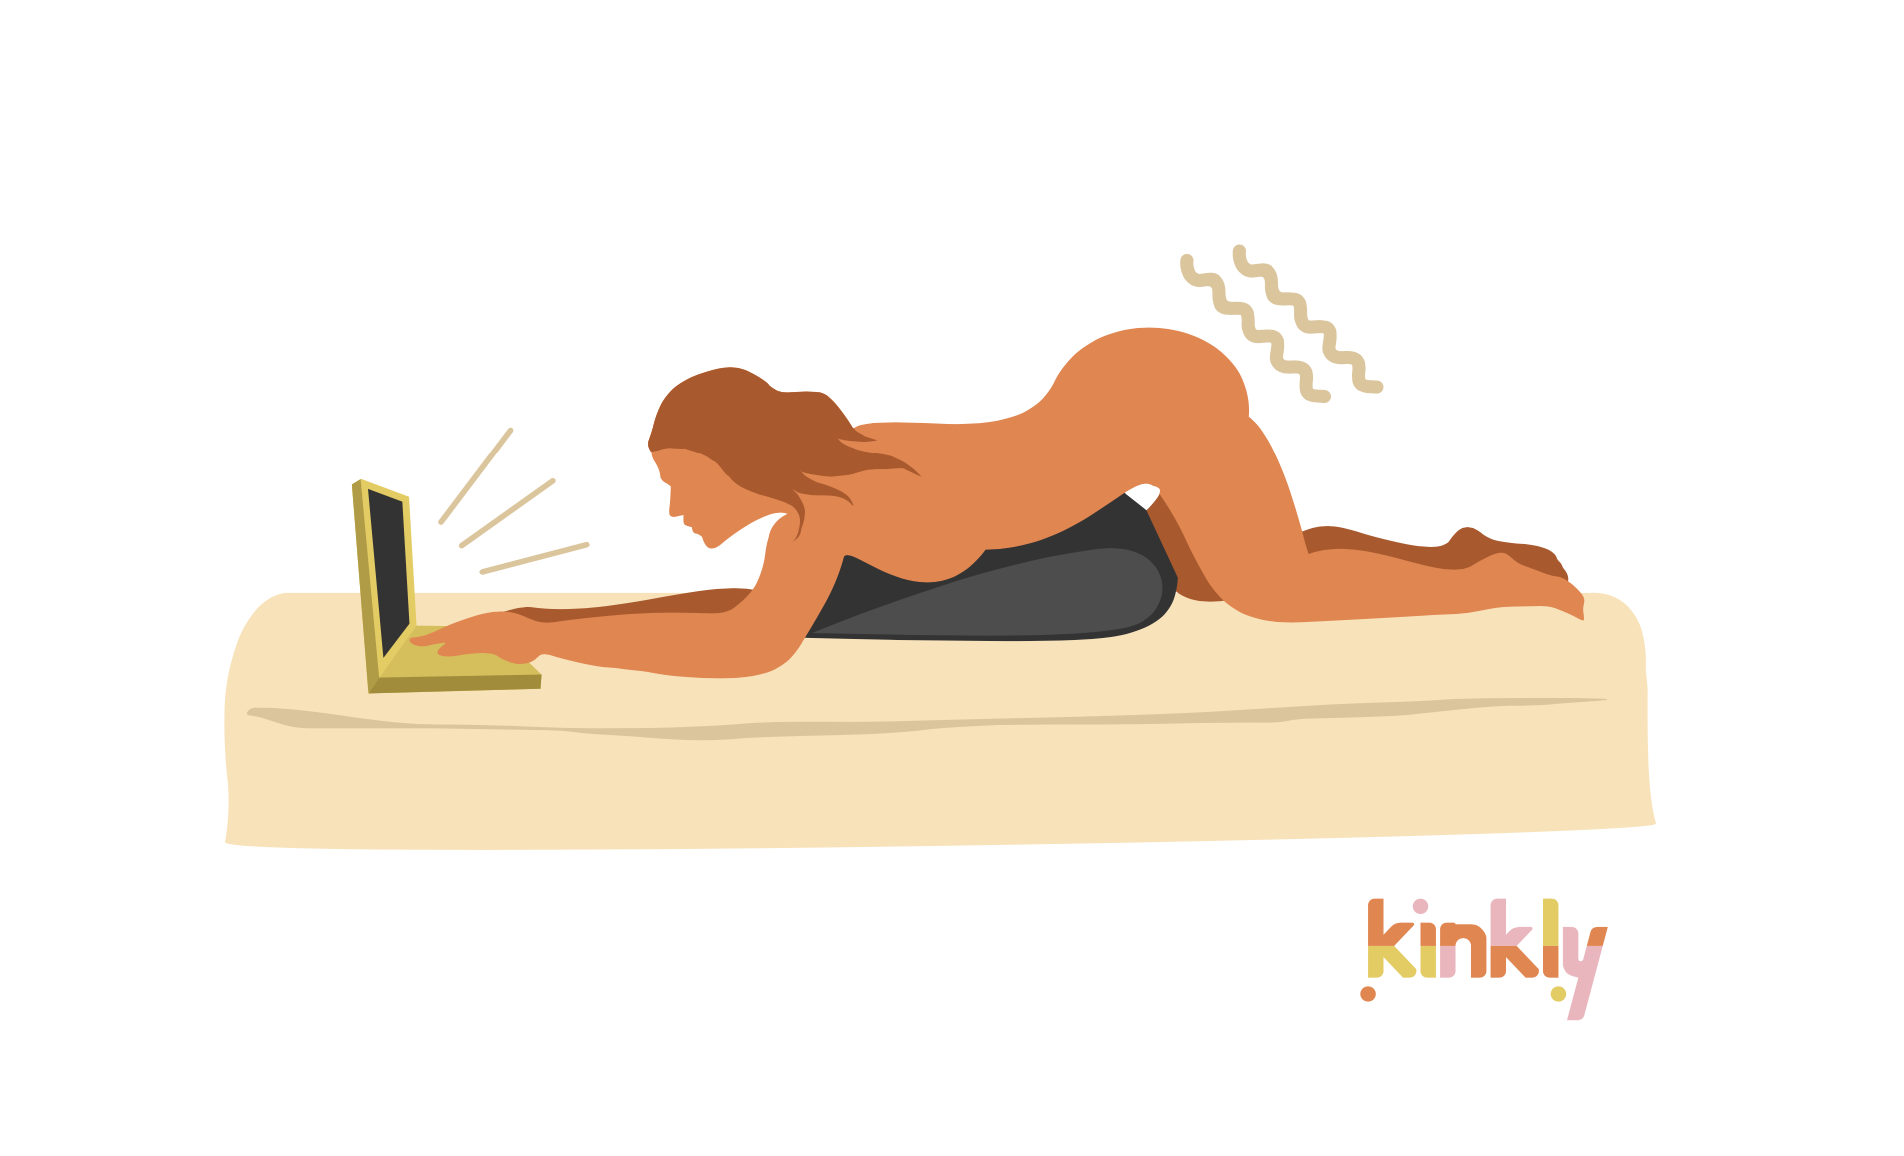 Illustrated sex position for the Tabbed Browser position. The person is laying on their tummy with their hips elevated by laying on top of a Liberator Axis. The Axis is holding a wand massager between the thighs for stimulation while the person uses their free two hands to use a laptop laying in front of them.